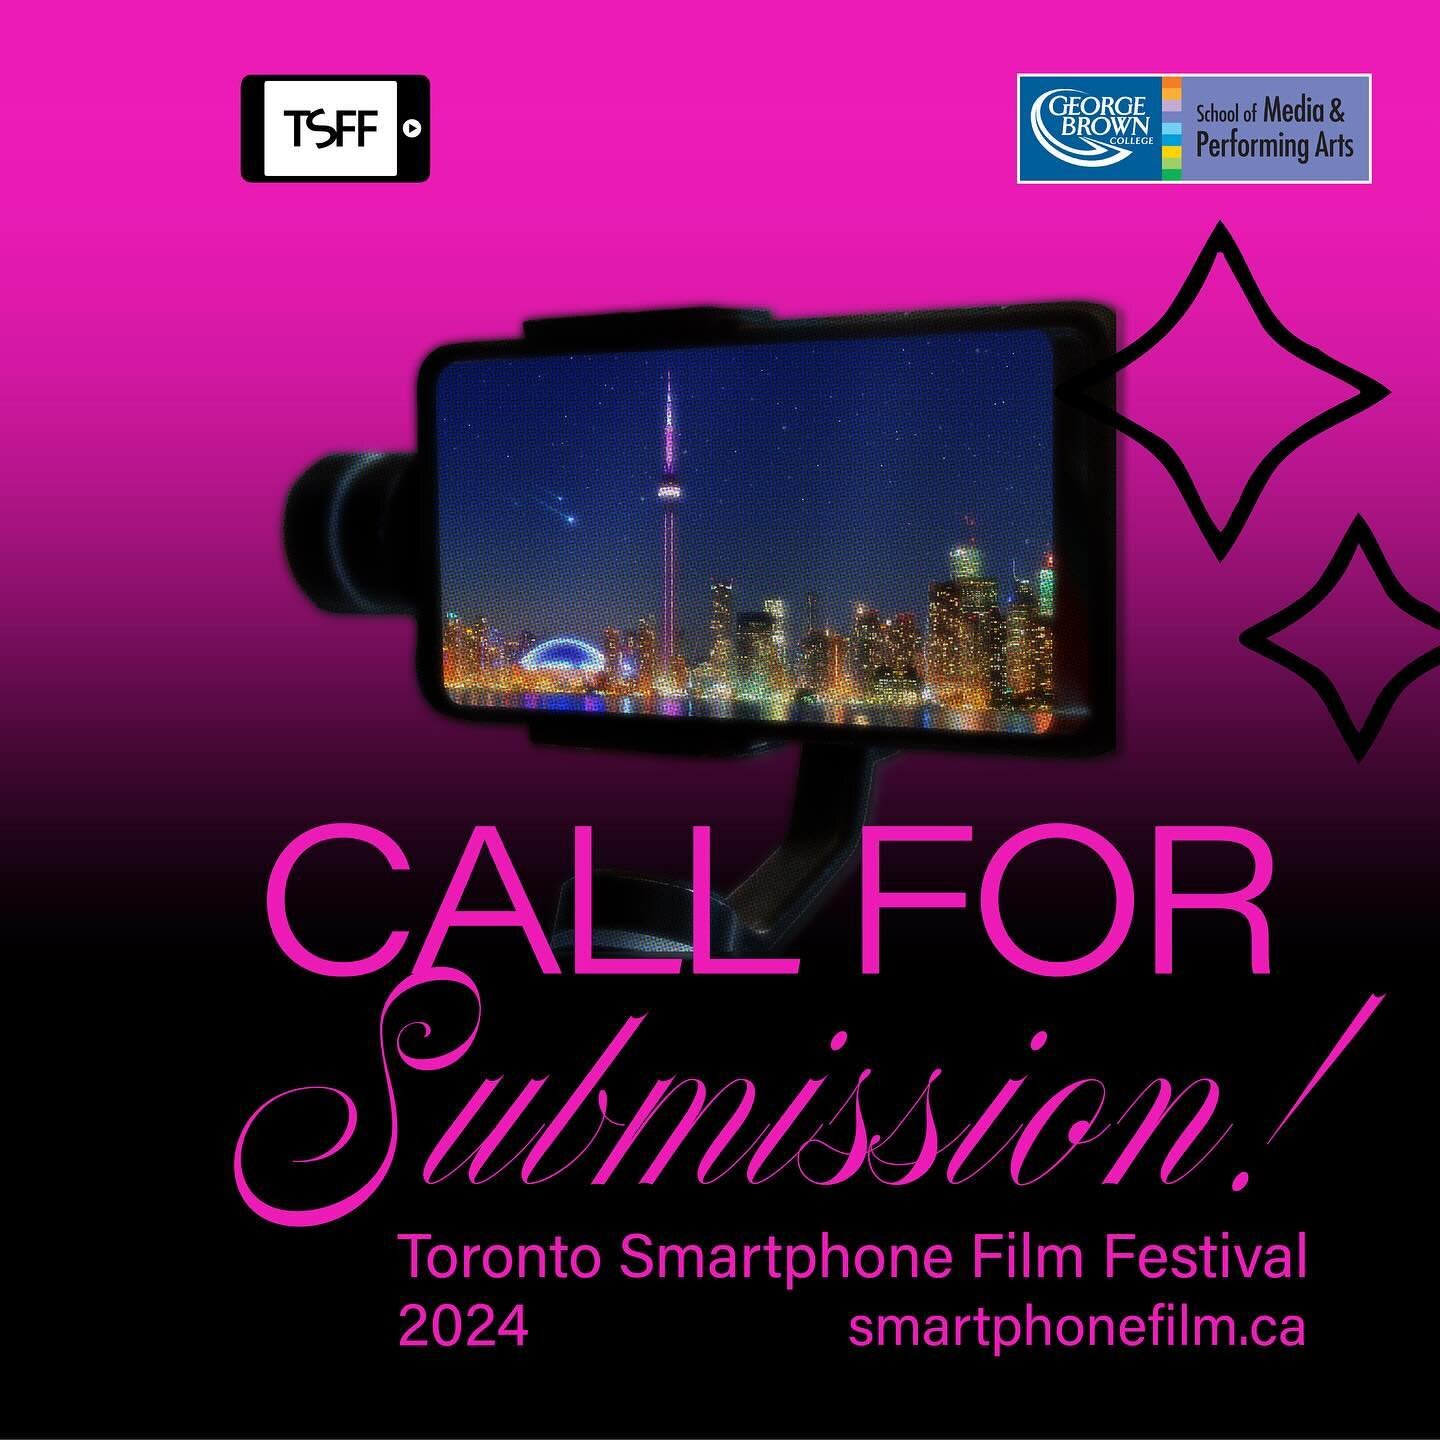 GBC&rsquo;s School of Media is excited to partner with Toronto Smartphone Film Festival to launch their SUBMISSION portal OPENING 🚀 Visit smartphonefilm.ca for instructions on how to submit your mobile cinematic masterpieces. Let&rsquo;s showcase th